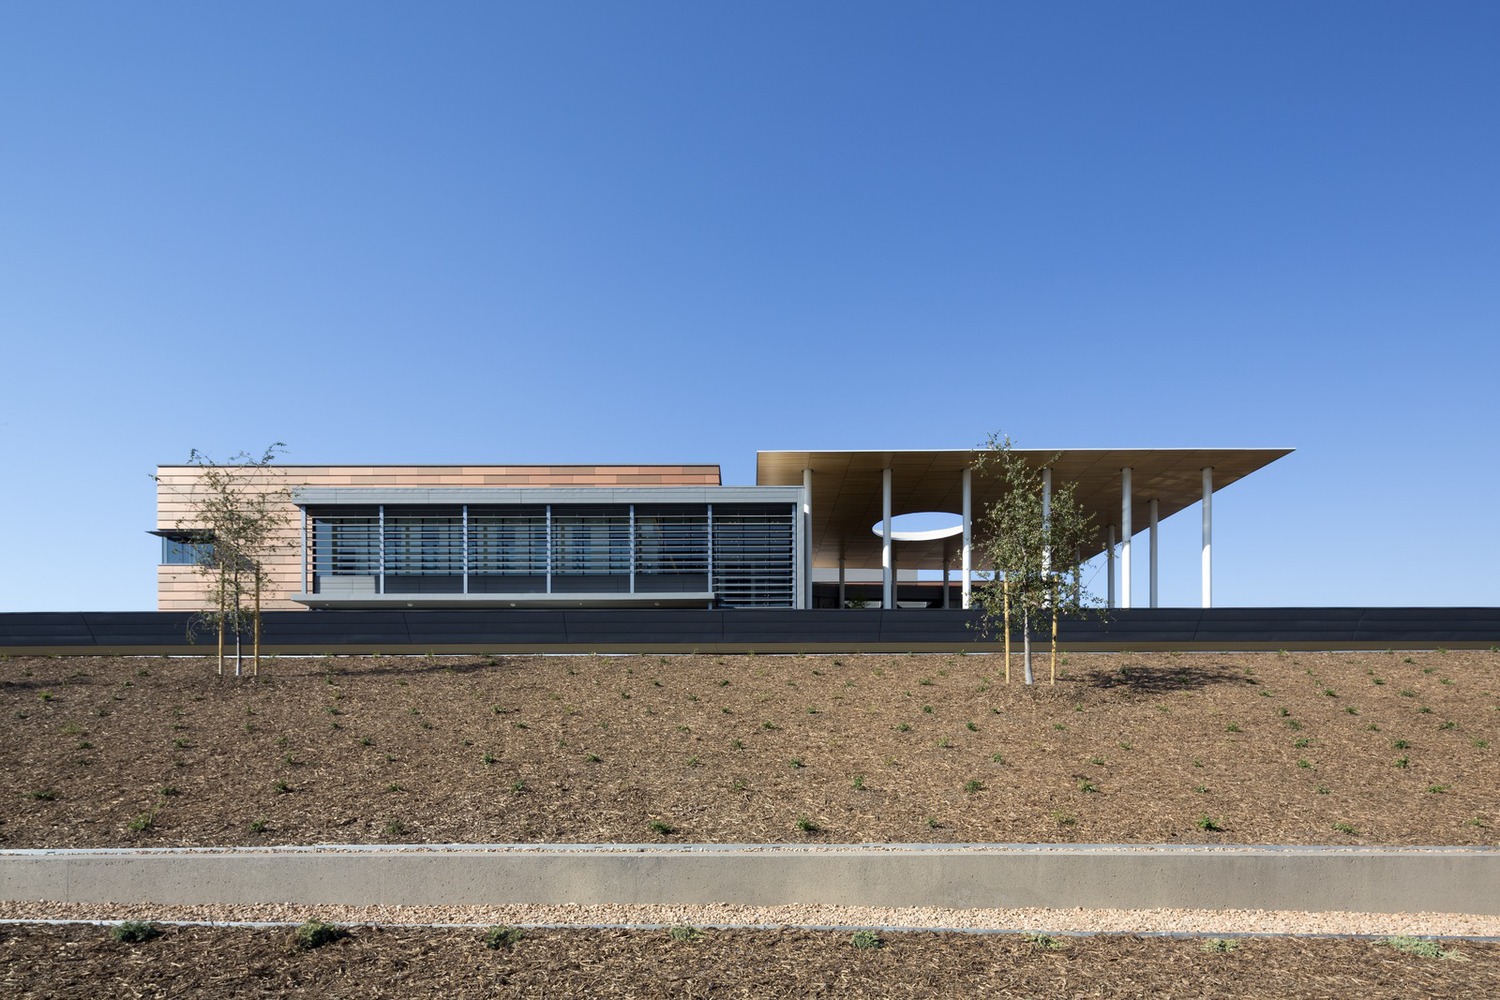 Idea 2240946: Porterville Courthouse by CO Architects in Porterville